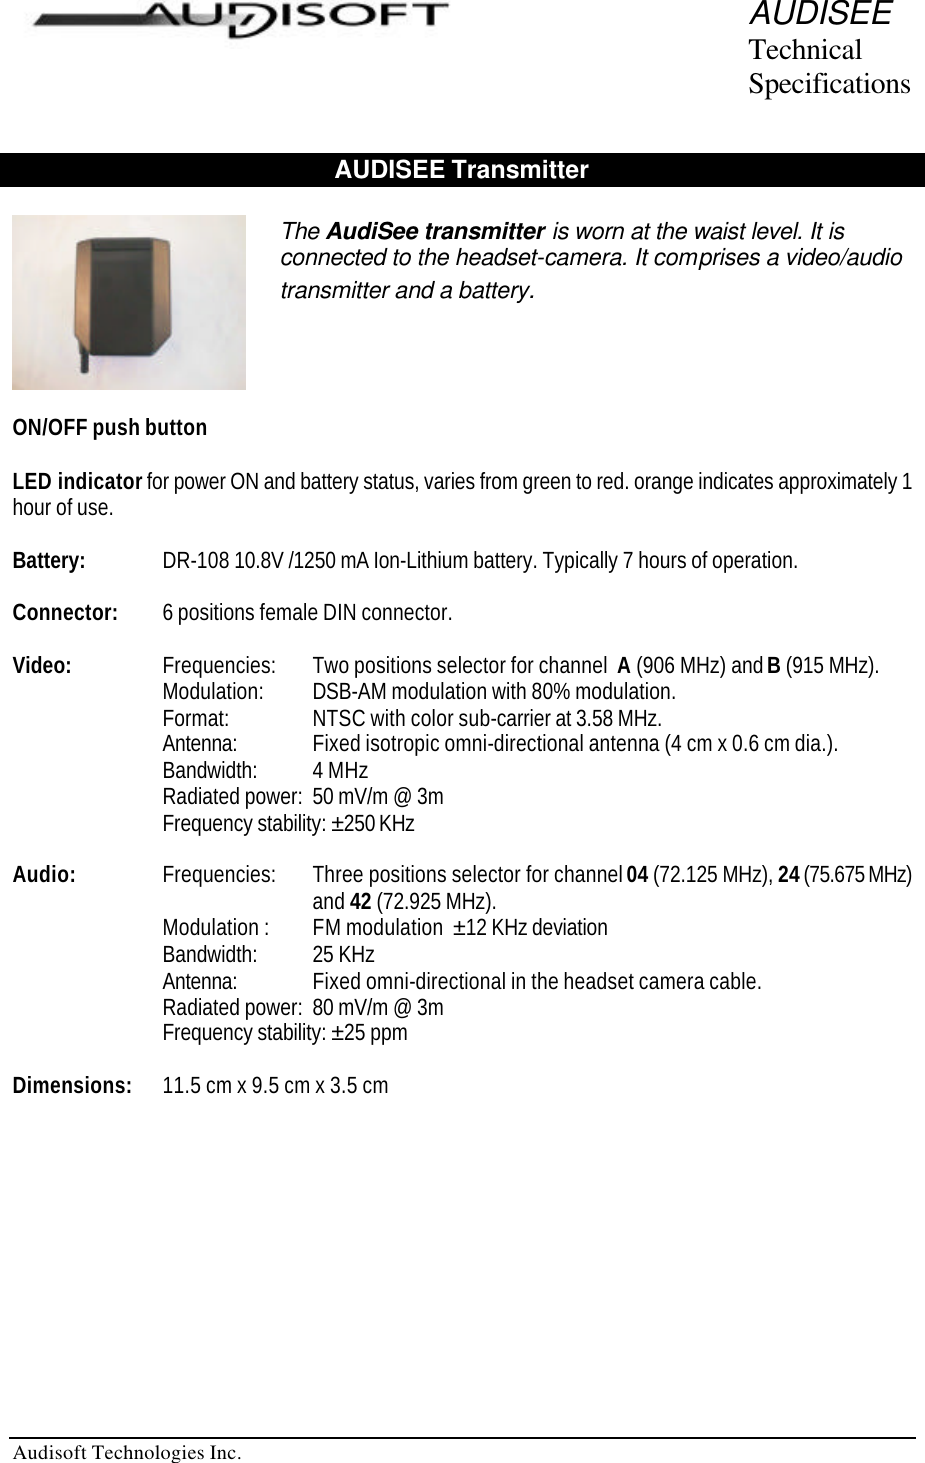   Audisoft Technologies Inc. AUDISEE Technical Specifications  AUDISEE Transmitter    ON/OFF push button  LED indicator for power ON and battery status, varies from green to red. orange indicates approximately 1 hour of use.  Battery:  DR-108 10.8V /1250 mA Ion-Lithium battery. Typically 7 hours of operation.  Connector: 6 positions female DIN connector.  Video:     Frequencies:  Two positions selector for channel  A (906 MHz) and B (915 MHz).   Modulation:  DSB-AM modulation with 80% modulation.    Format:   NTSC with color sub-carrier at 3.58 MHz.   Antenna:  Fixed isotropic omni-directional antenna (4 cm x 0.6 cm dia.).    Bandwidth:  4 MHz   Radiated power:  50 mV/m @ 3m   Frequency stability: ±250 KHz   Audio:  Frequencies:  Three positions selector for channel 04 (72.125 MHz), 24 (75.675 MHz)  and 42 (72.925 MHz). Modulation :  FM modulation  ±12 KHz deviation   Bandwidth:  25 KHz Antenna:  Fixed omni-directional in the headset camera cable. Radiated power:  80 mV/m @ 3m Frequency stability: ±25 ppm  Dimensions:   11.5 cm x 9.5 cm x 3.5 cm    The AudiSee transmitter is worn at the waist level. It is connected to the headset-camera. It comprises a video/audio transmitter and a battery. 